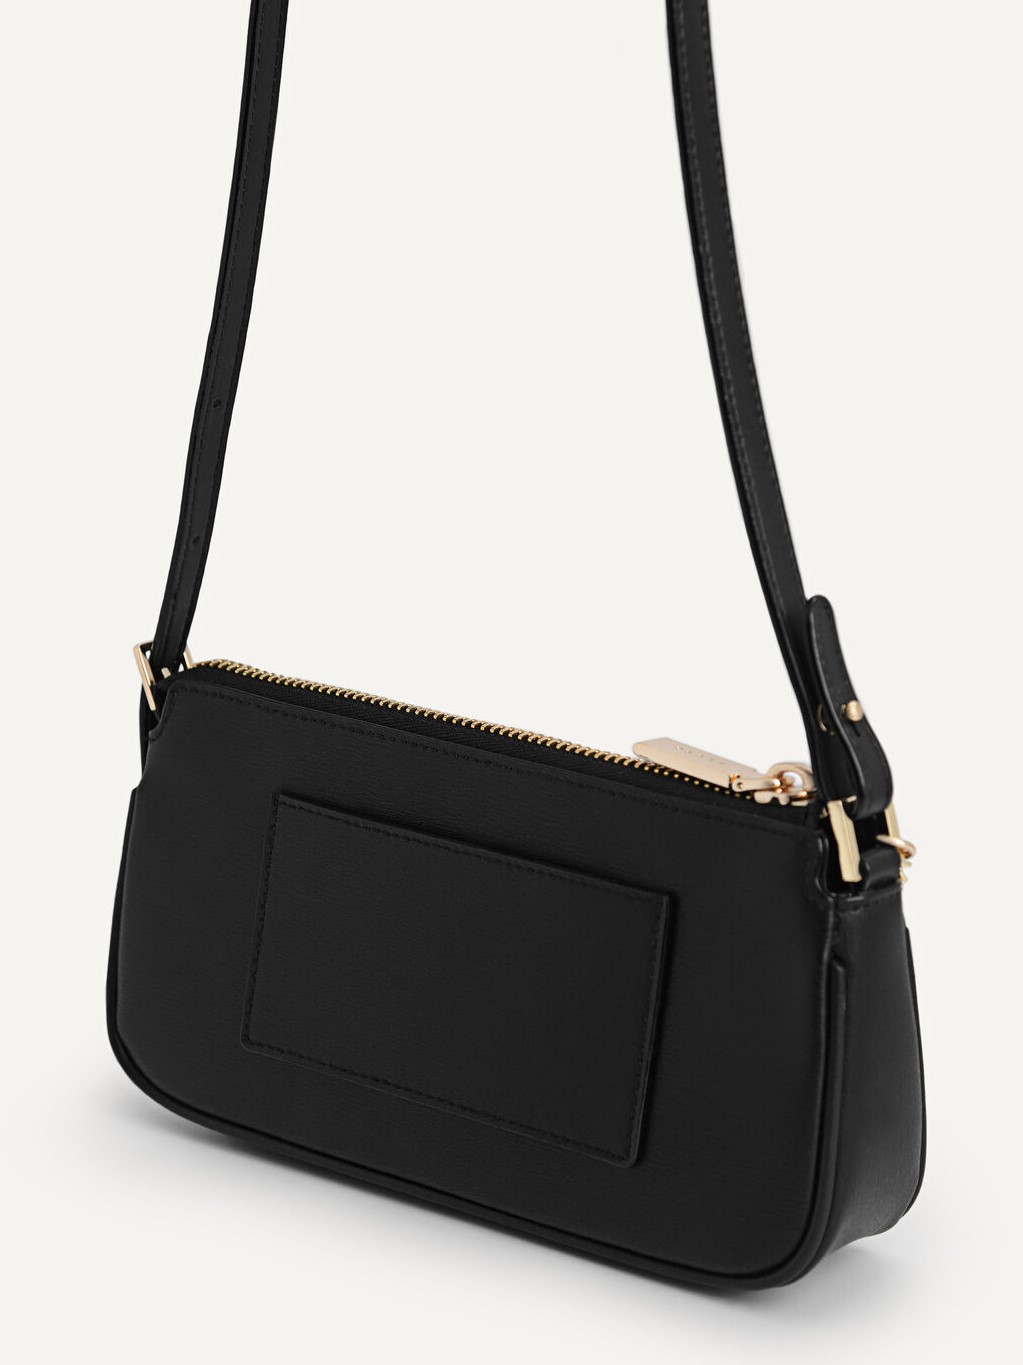 TÚI XÁCH PEDRO MADDY LEATHER CHAIN DETAILED SHOULDER BAG 16